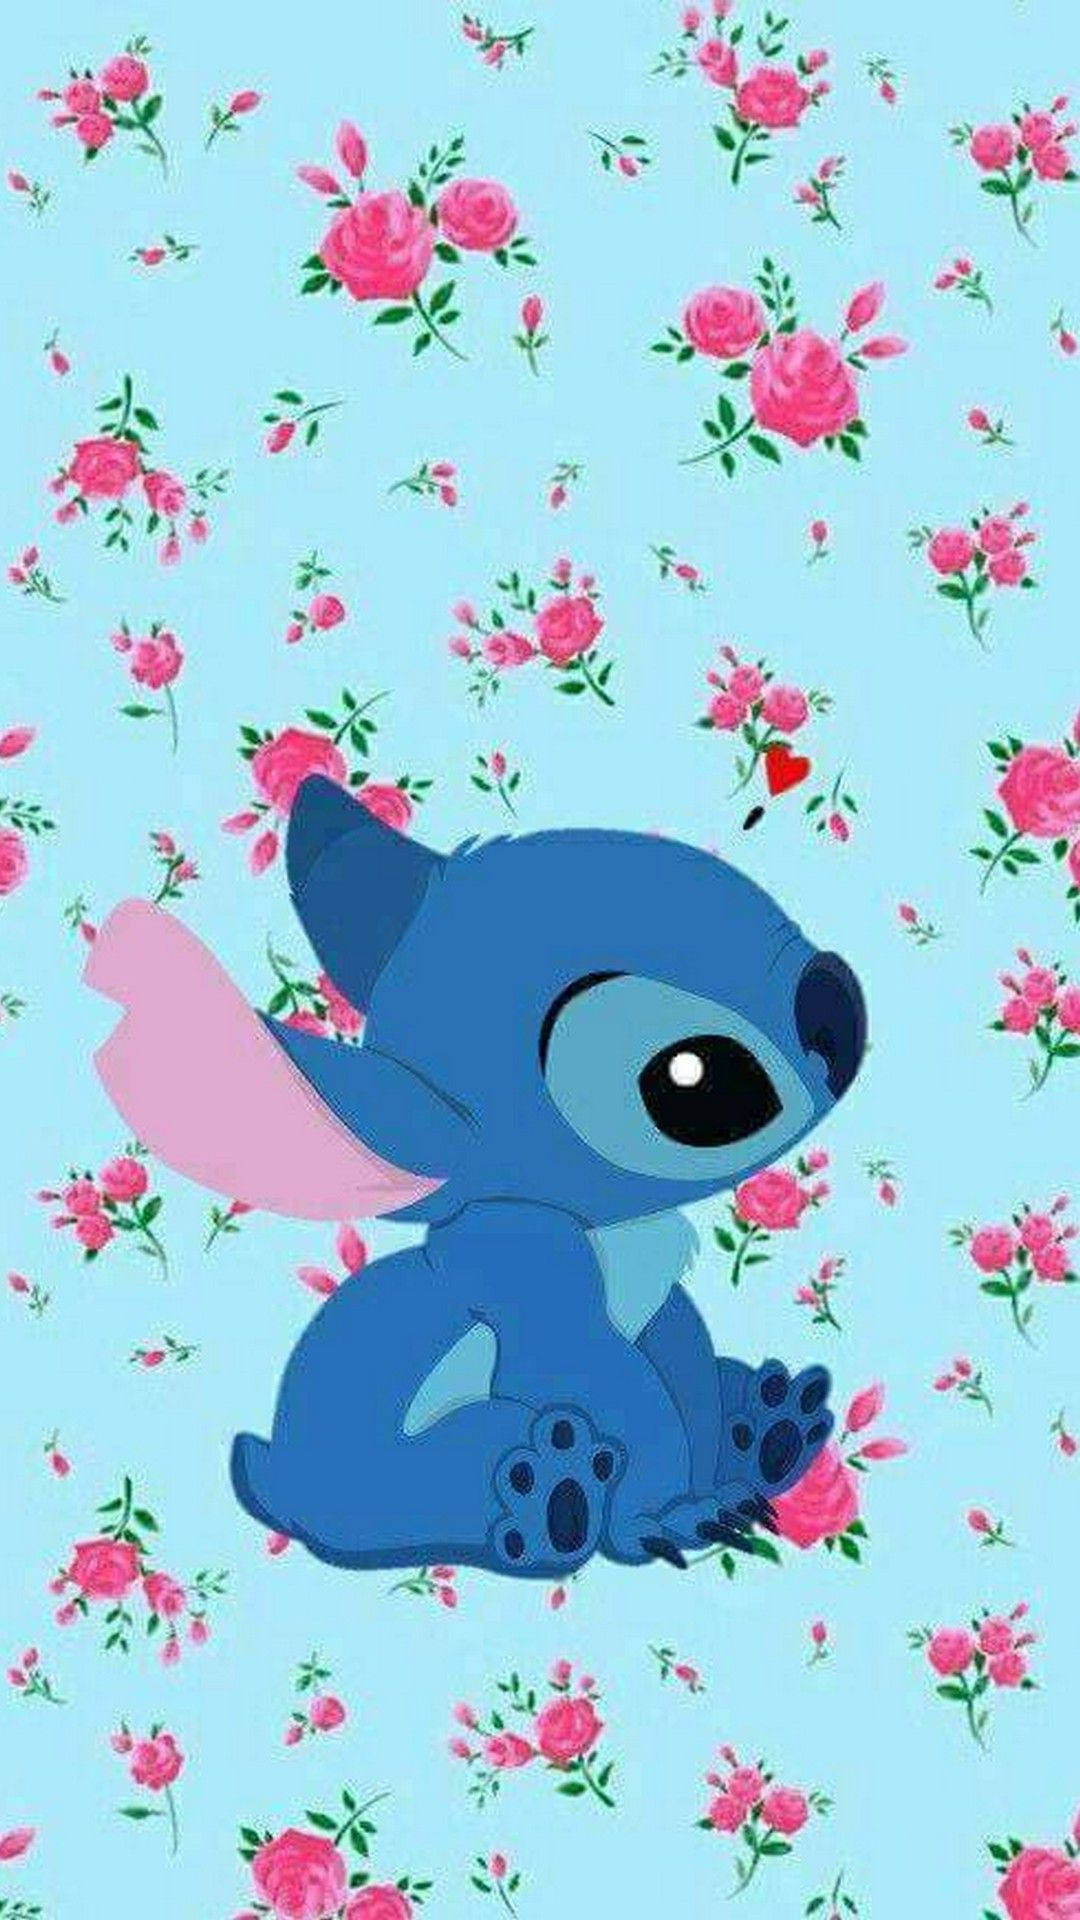 Cute Aesthetic Stitch With Floral Design Wallpaper